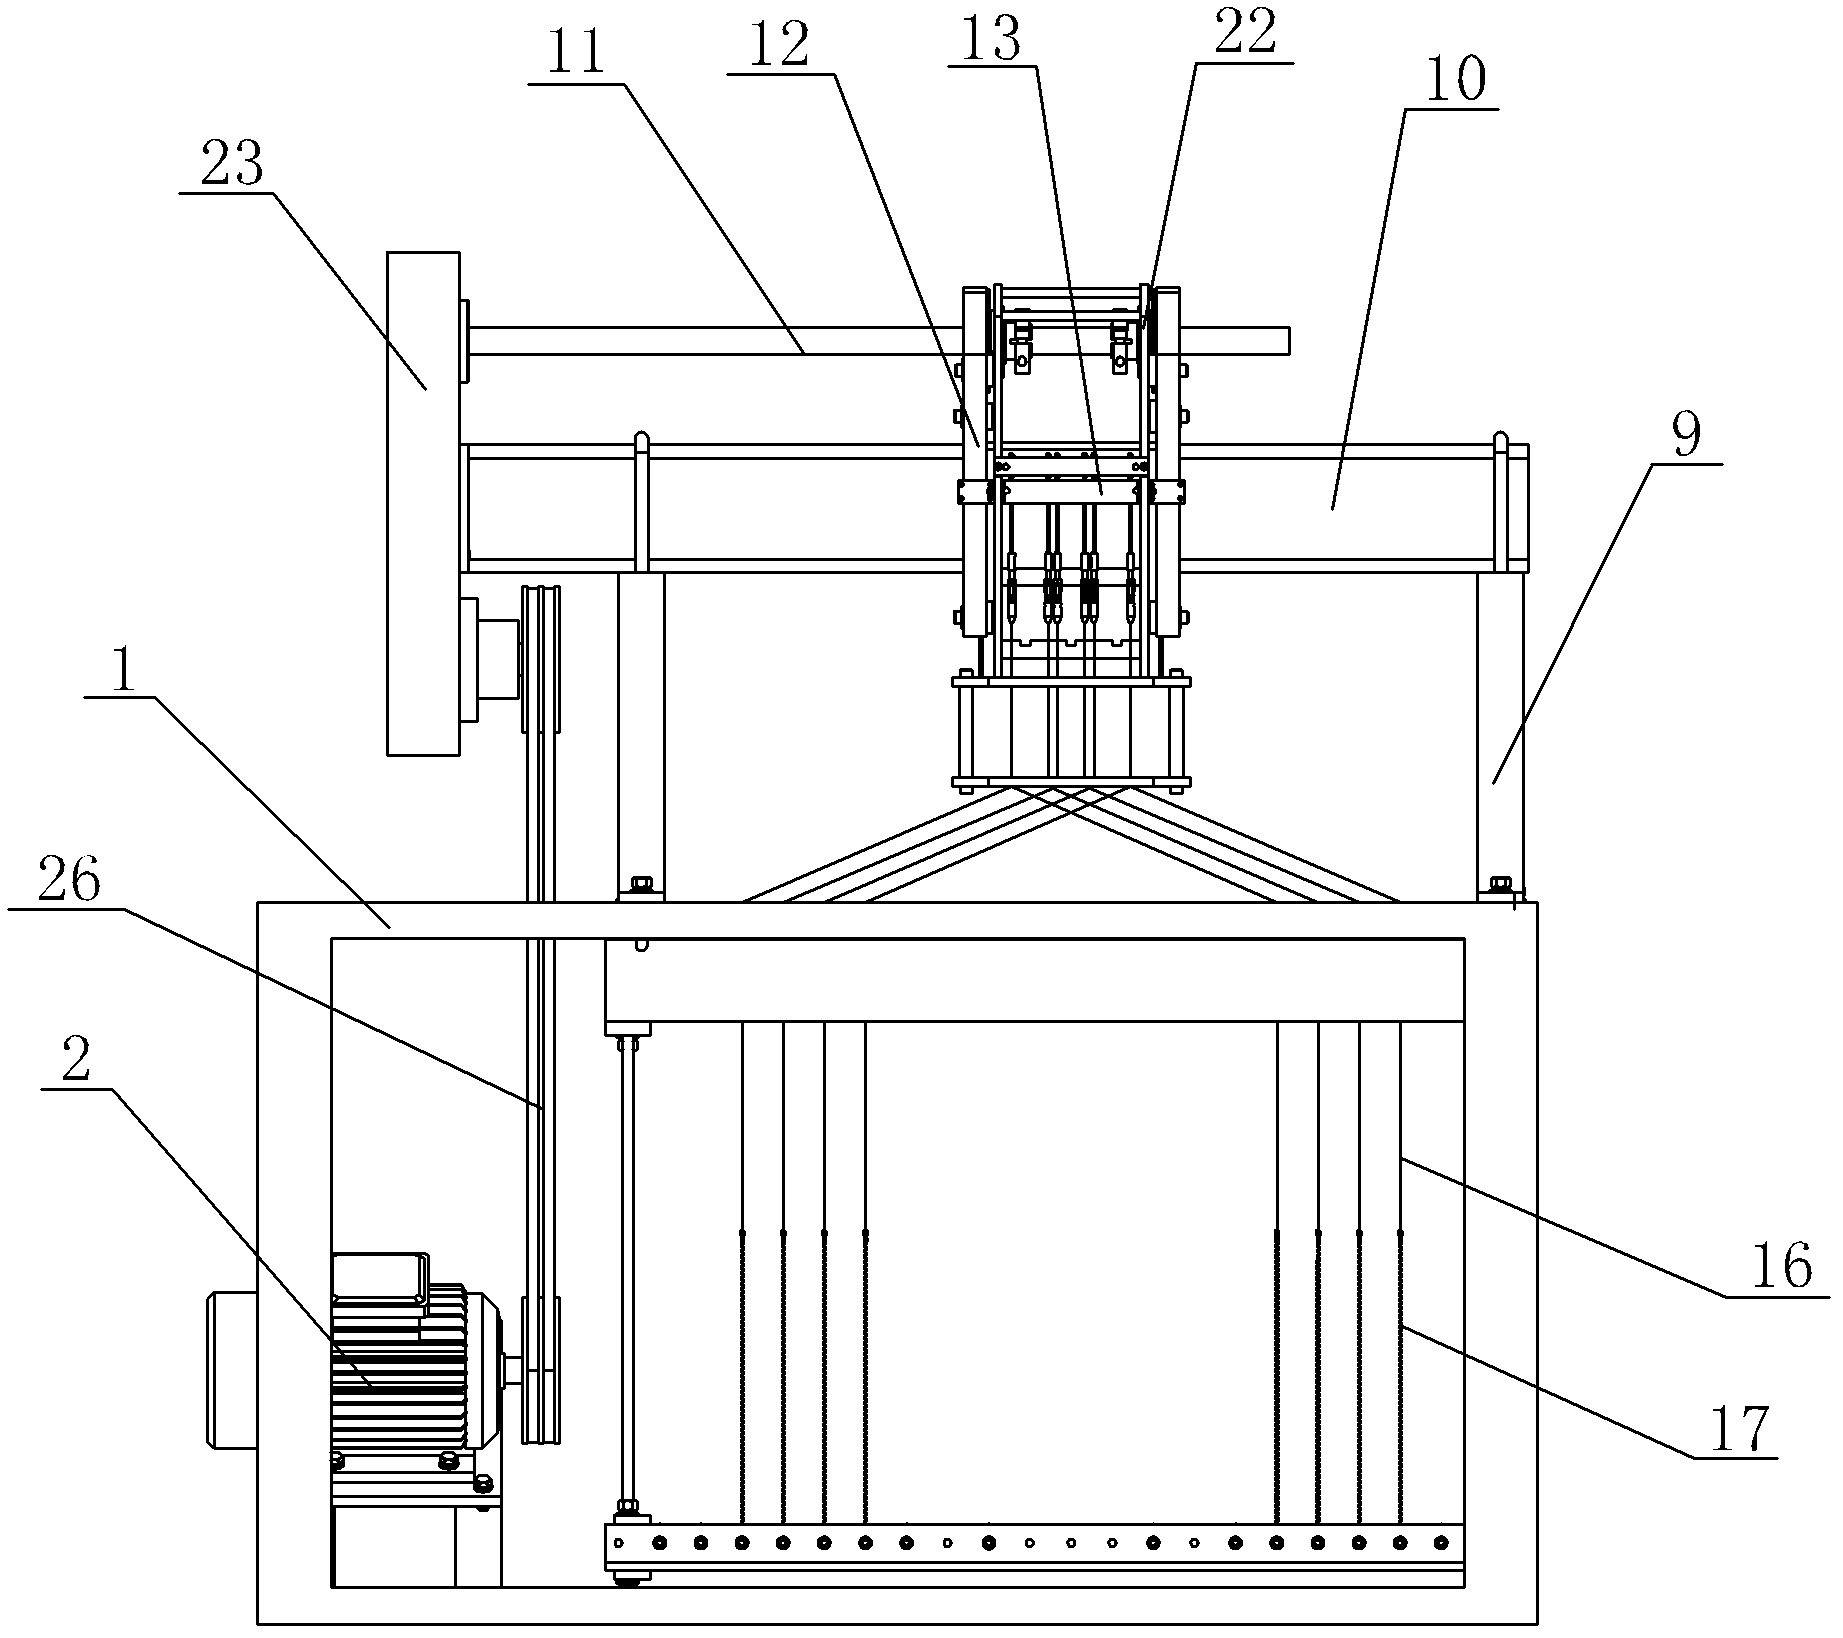 Threading device on harness string spring testing equipment